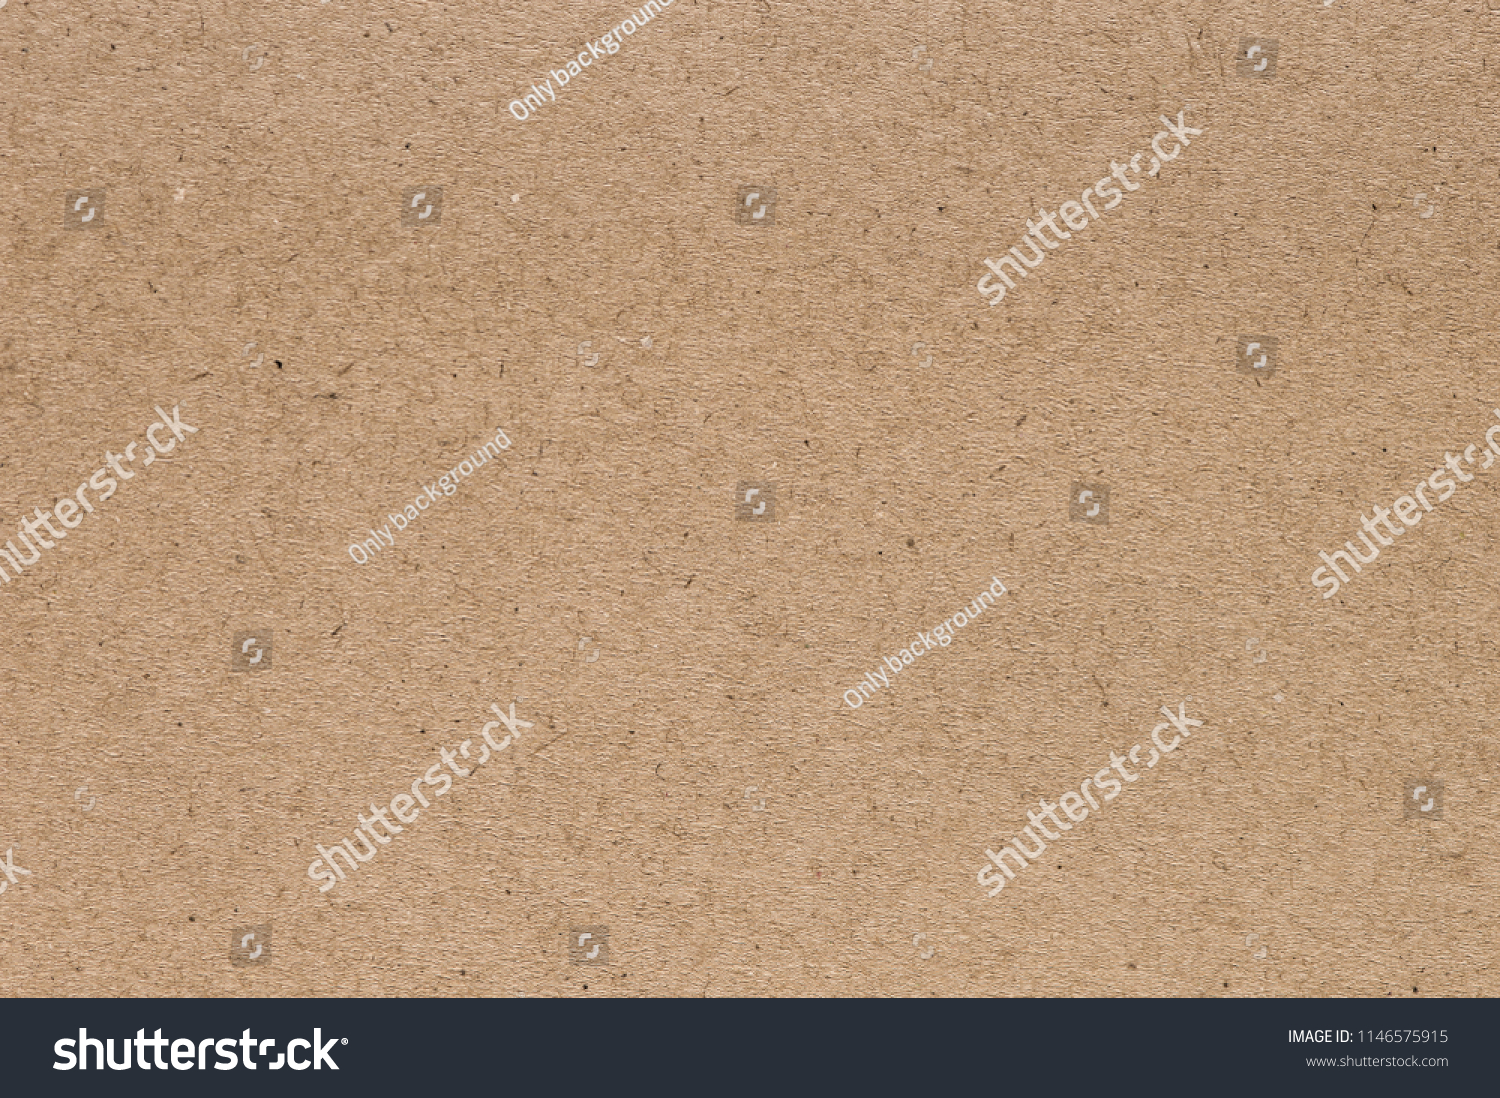 Brown paper texture abstract background. #1146575915